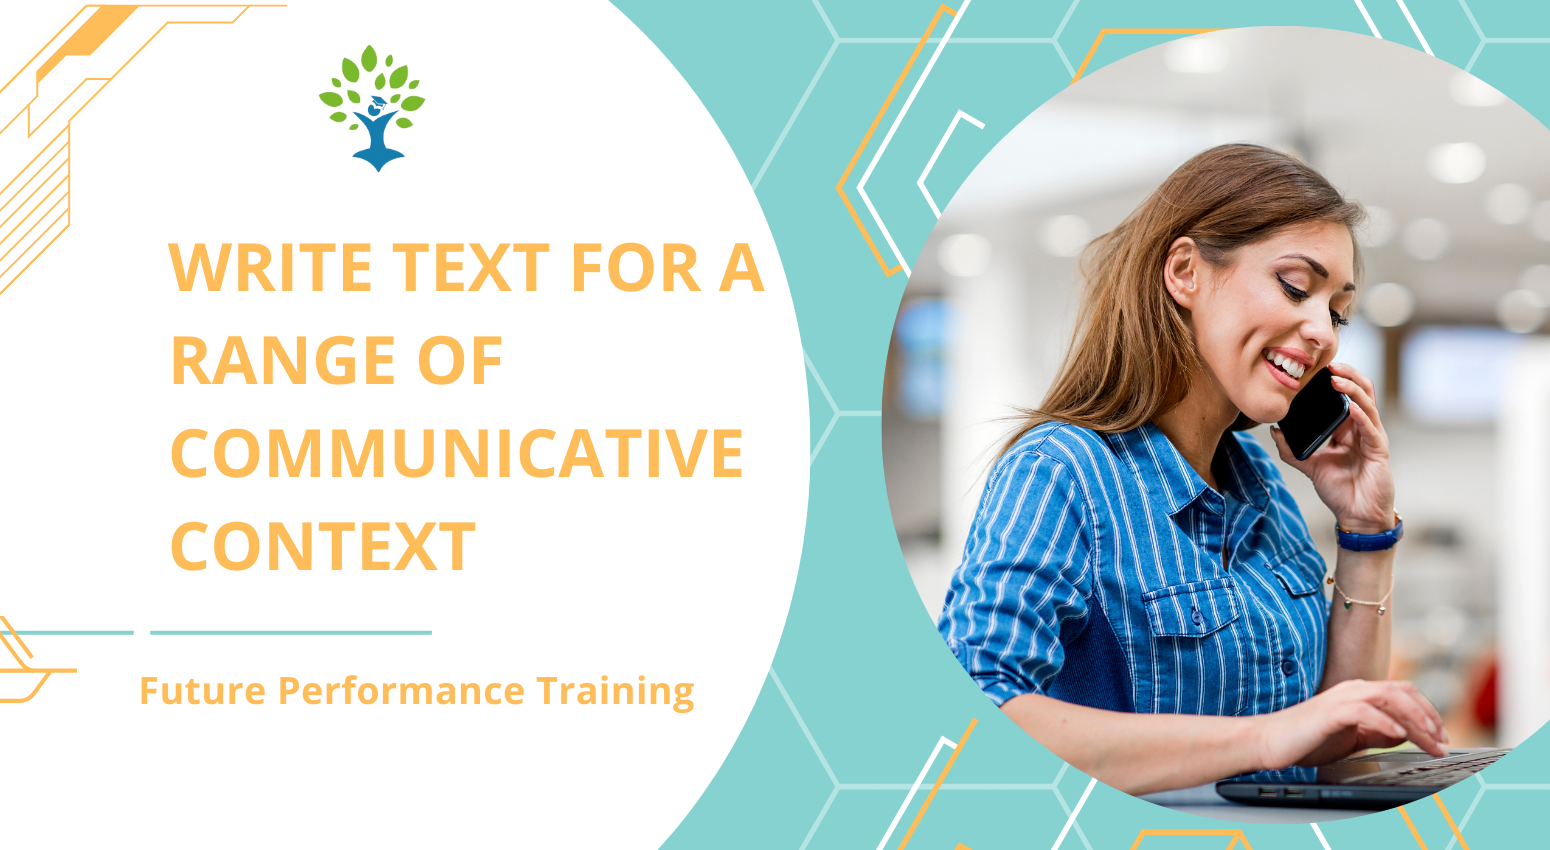 Write Text for a Range of Communicative Contexts